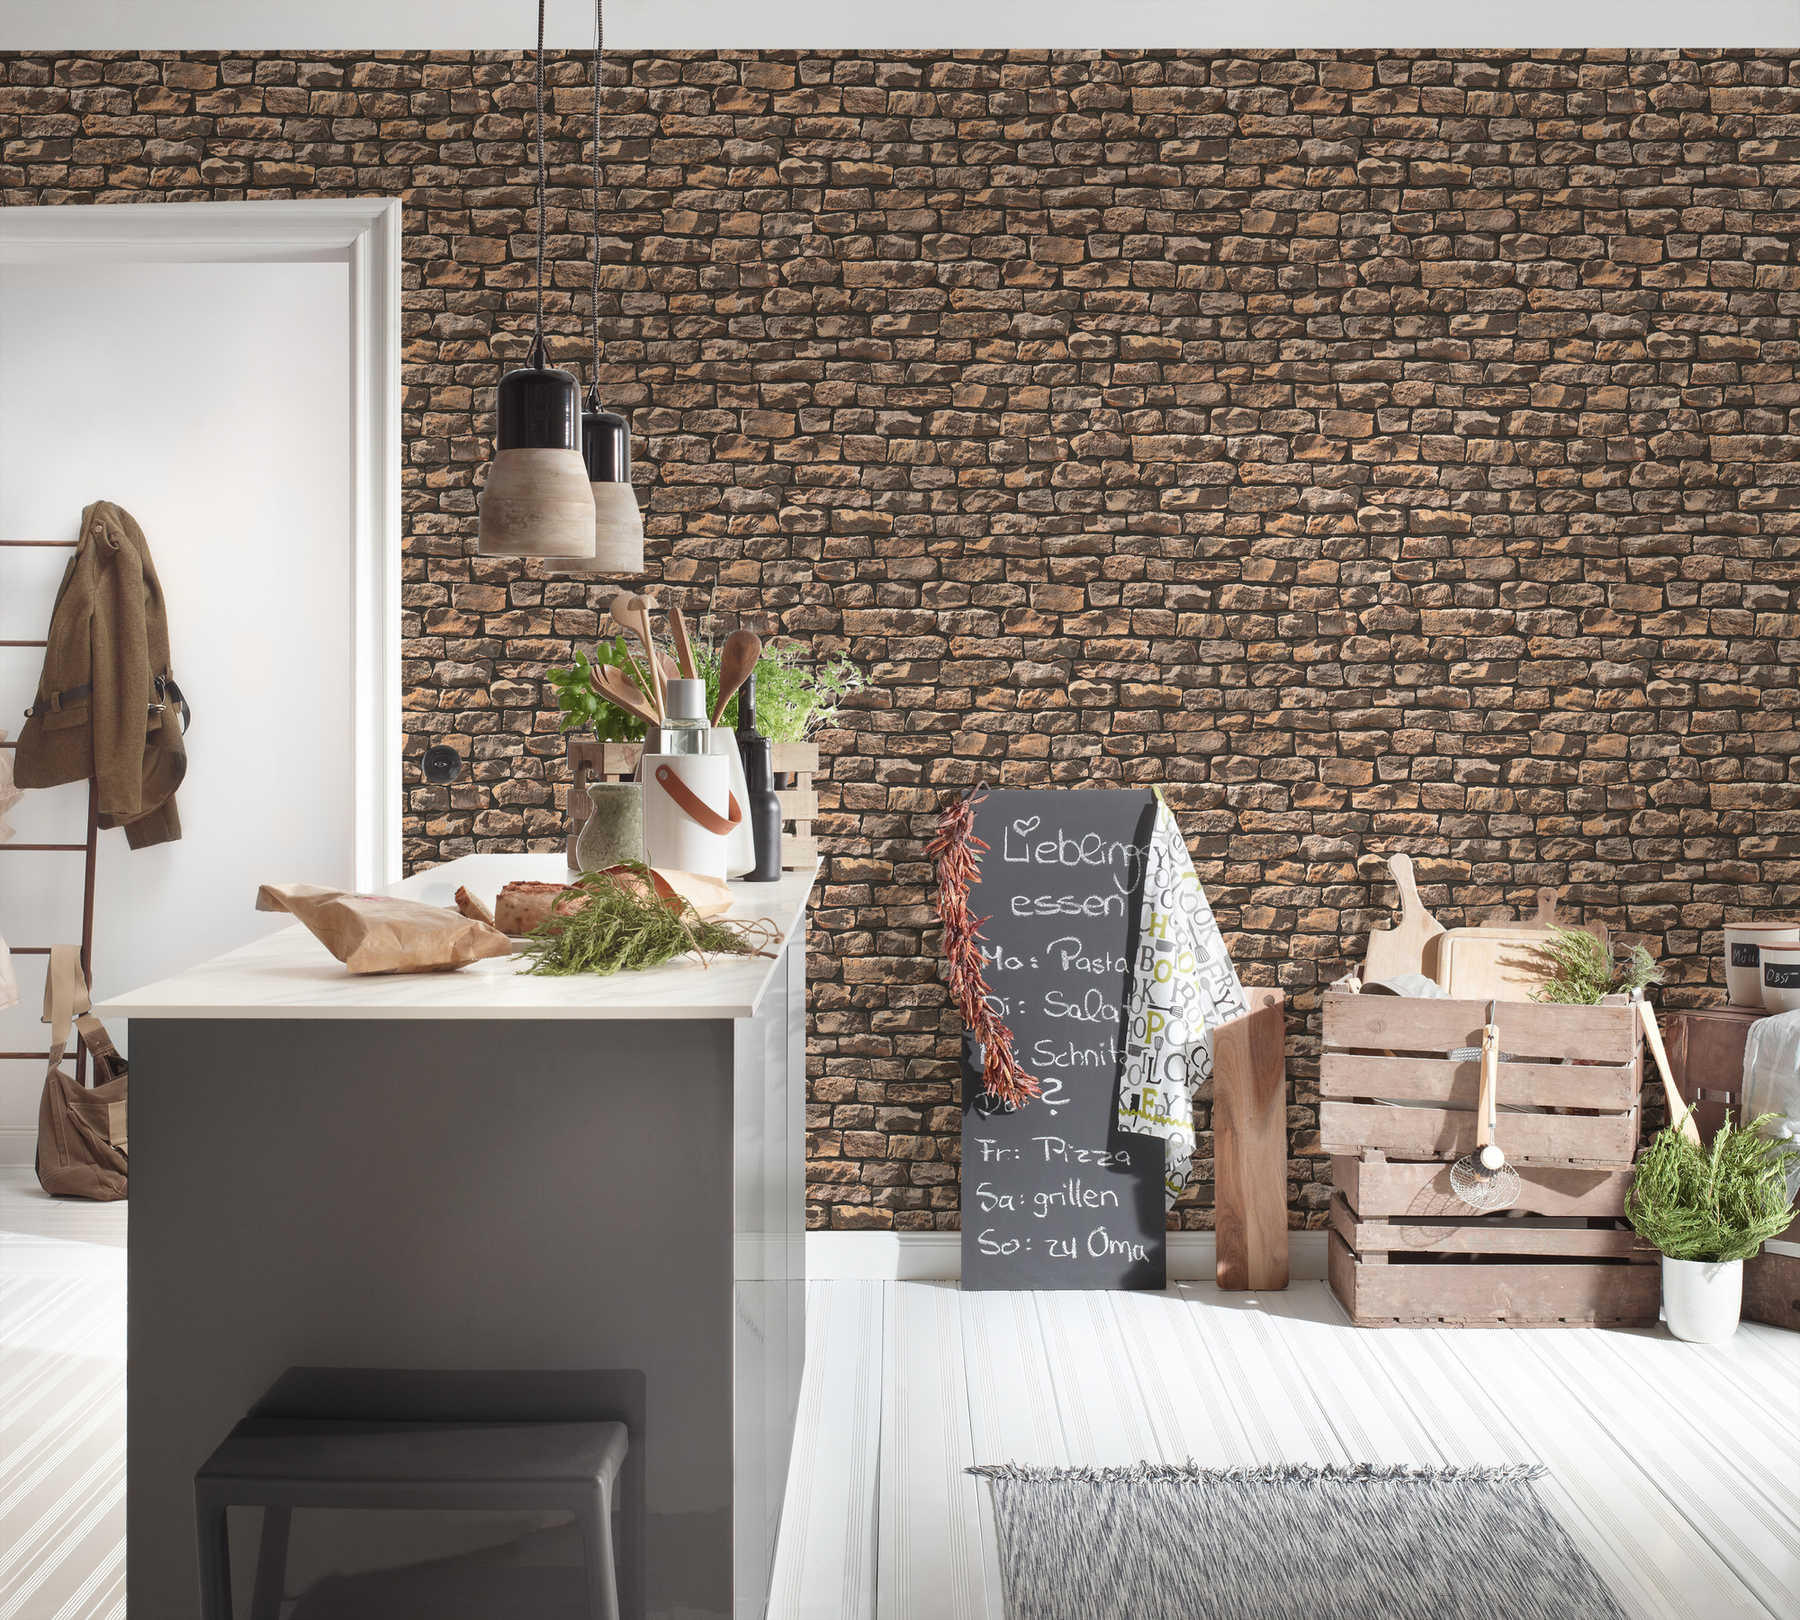             Masonry wallpaper with realistic natural stones - brown, beige, black
        